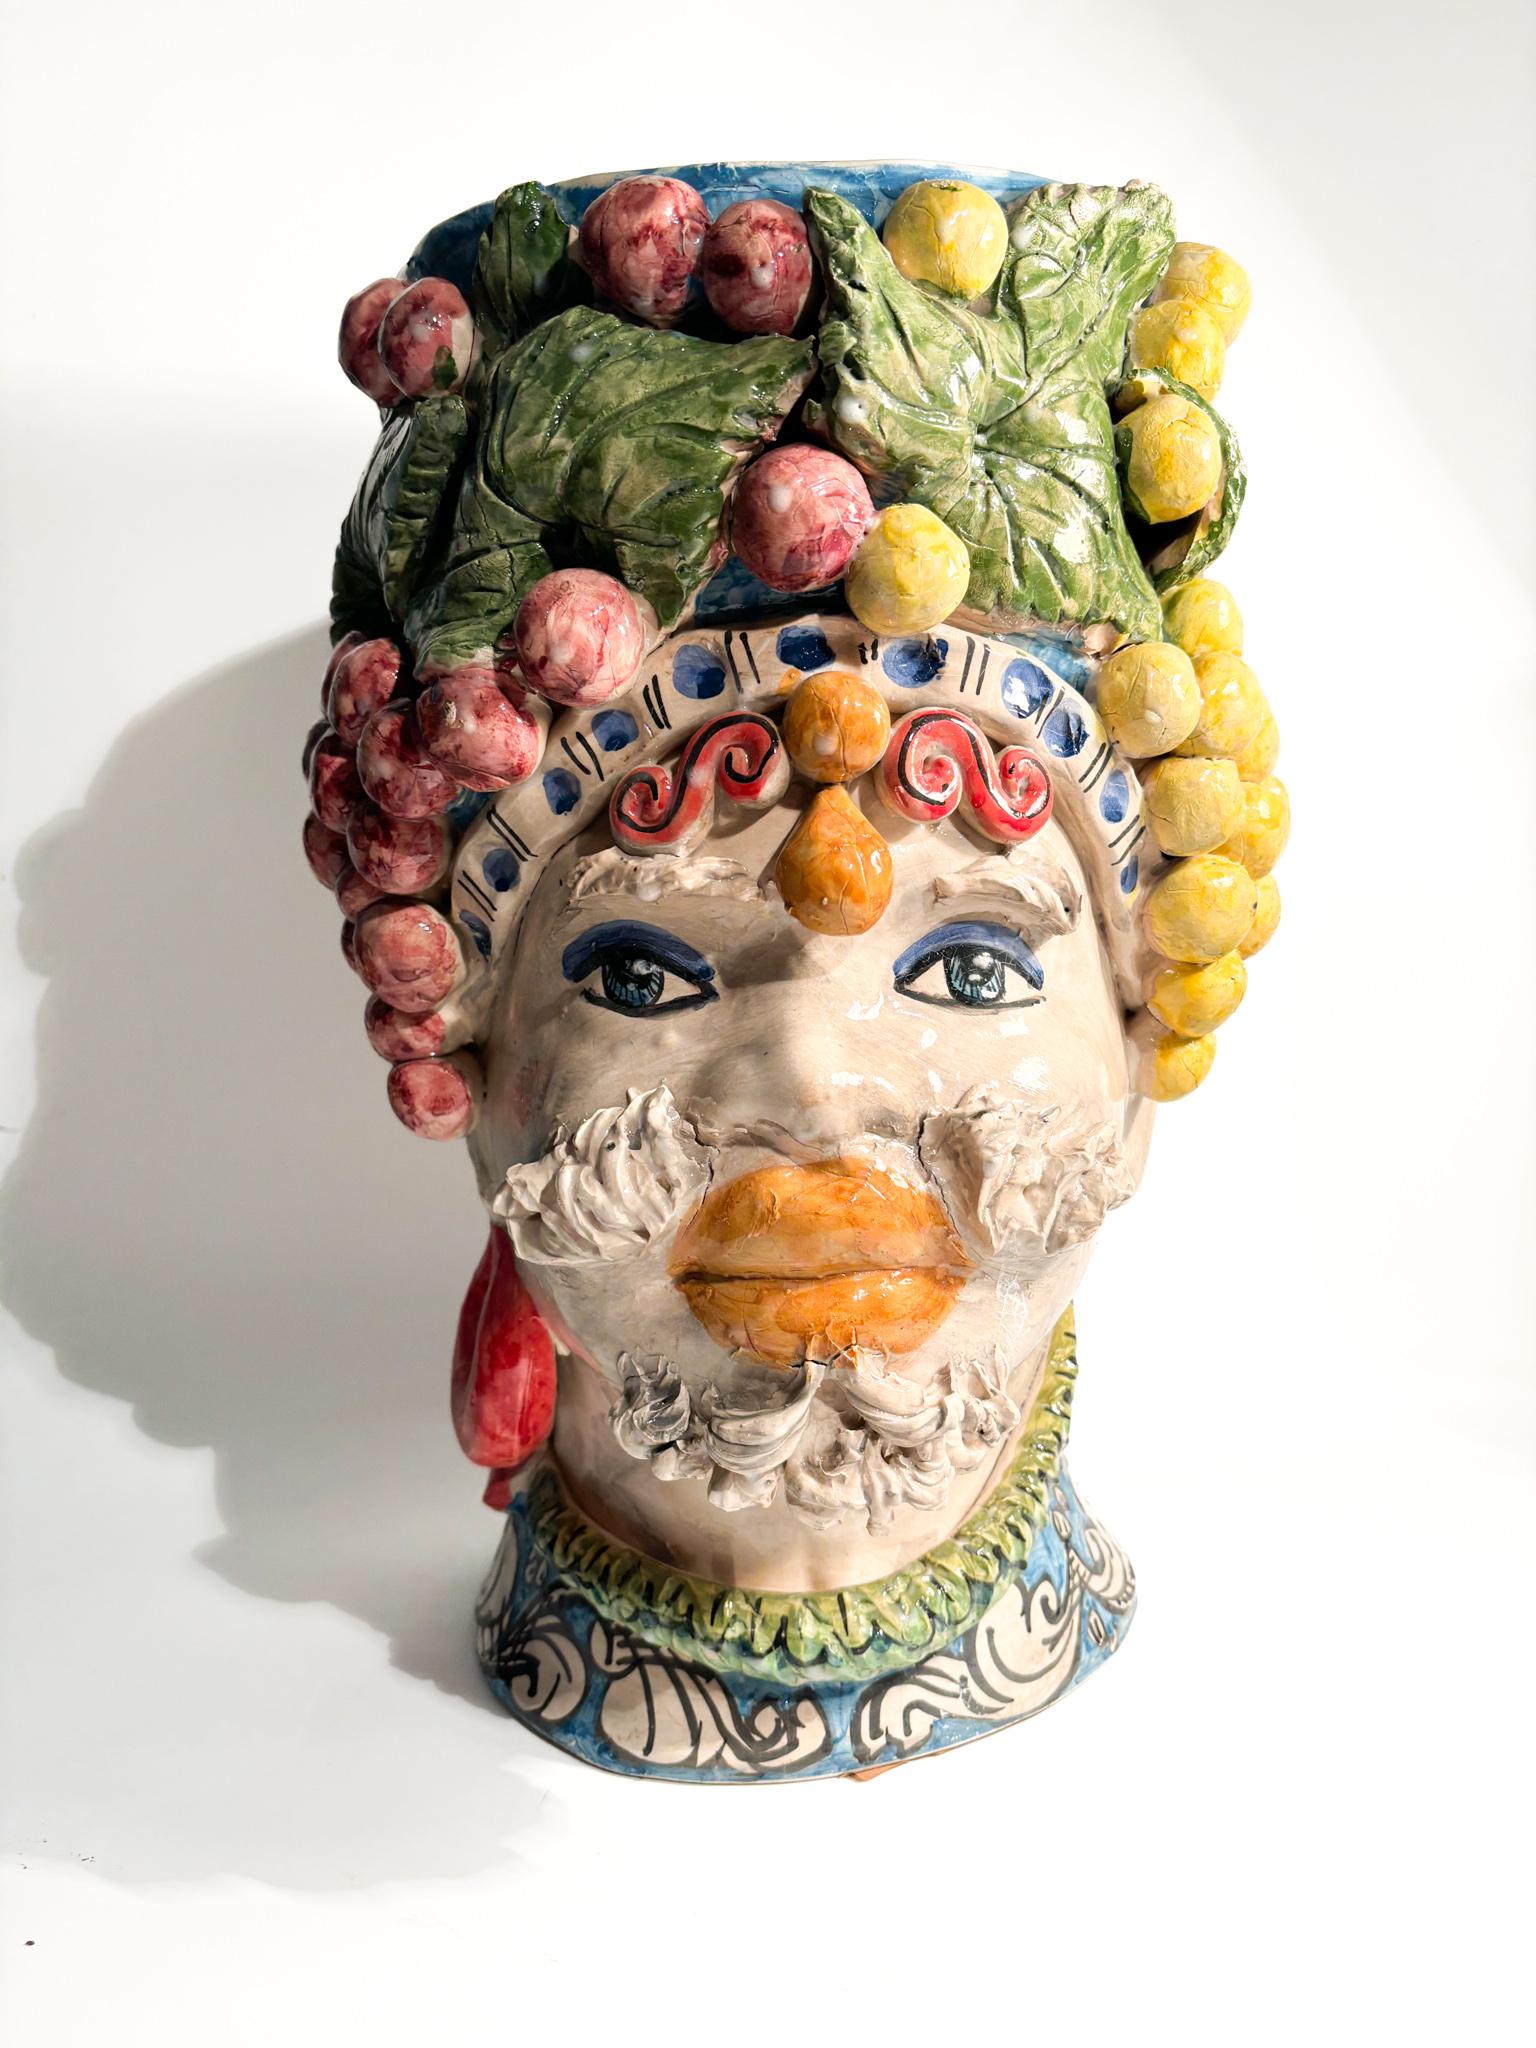 Caltagirone Moor's head of a male figure with vine, made by Ceramiche Germano in the 1990s

Ø 28 cm h 44 cm

Ceramiche Germano is a ceramic company based in Caltagirone, Sicily, Italy. The company was founded in 1967 by Sebastiano Germano and is